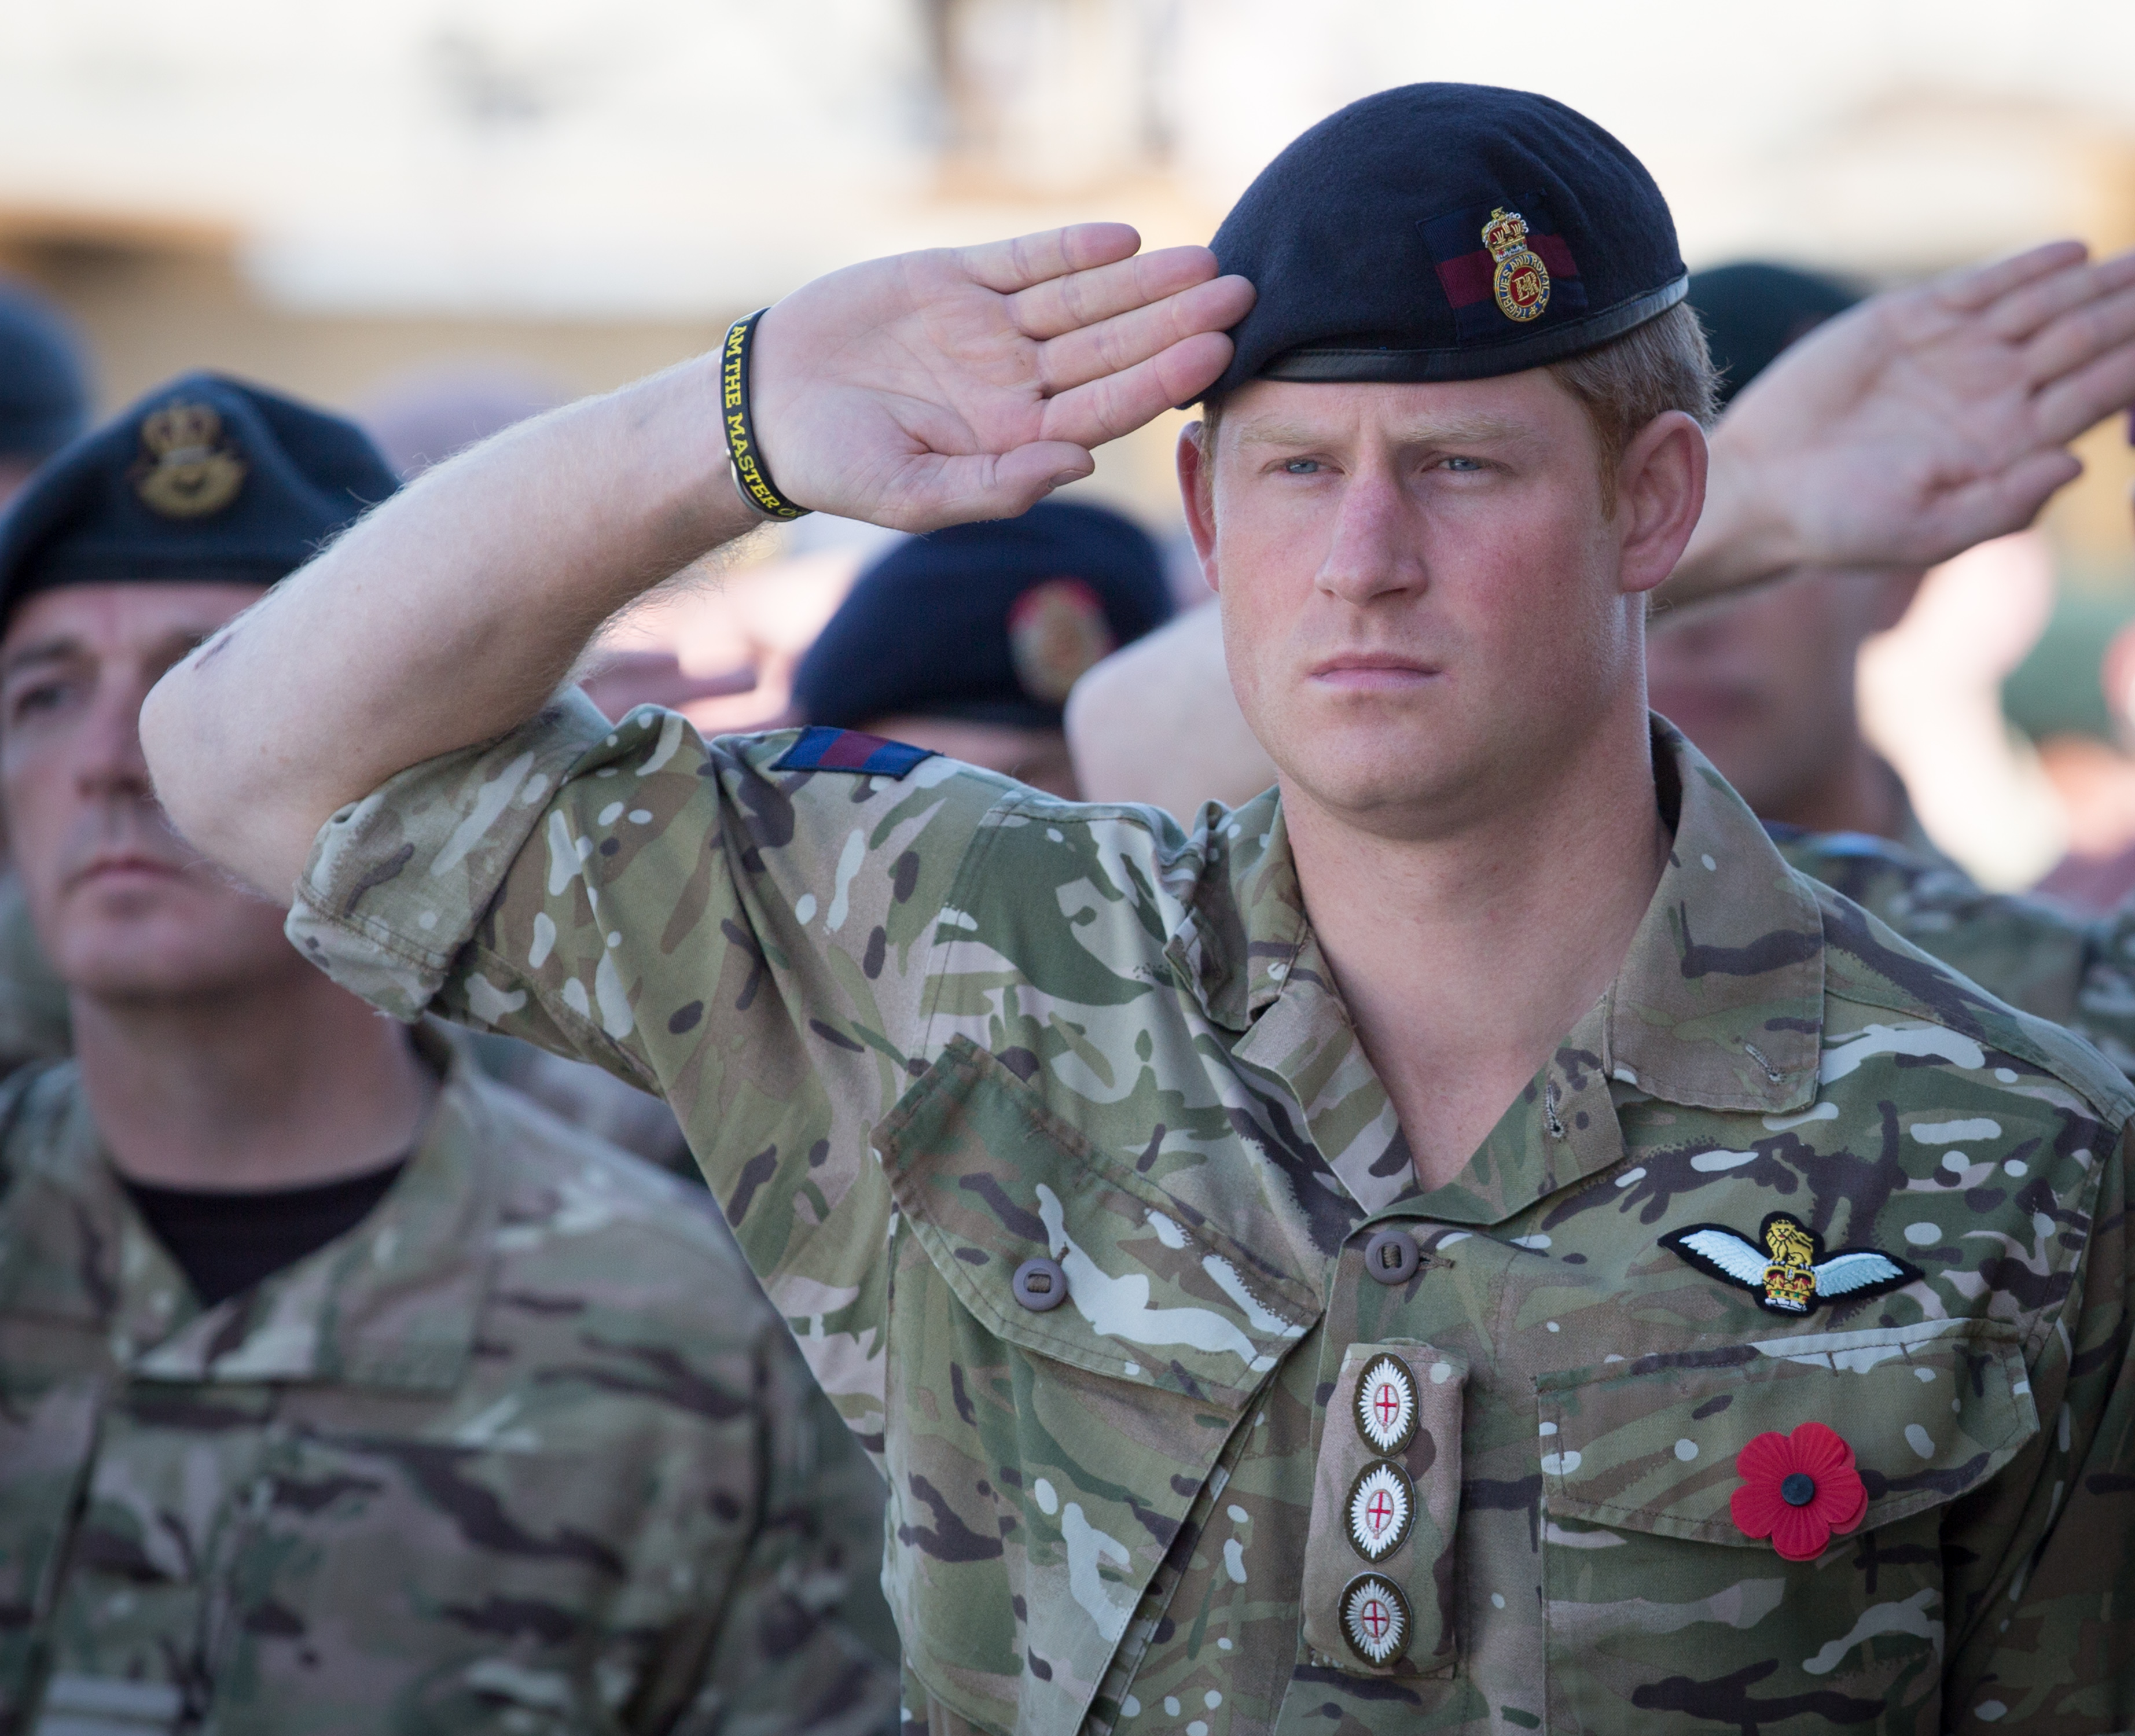 Prince Harry gathered with other British troops for a Remembrance Sunday service at Kandahar Airfield in Kandahar, Afghanistan on November 9, 2014 | Source: Getty Images